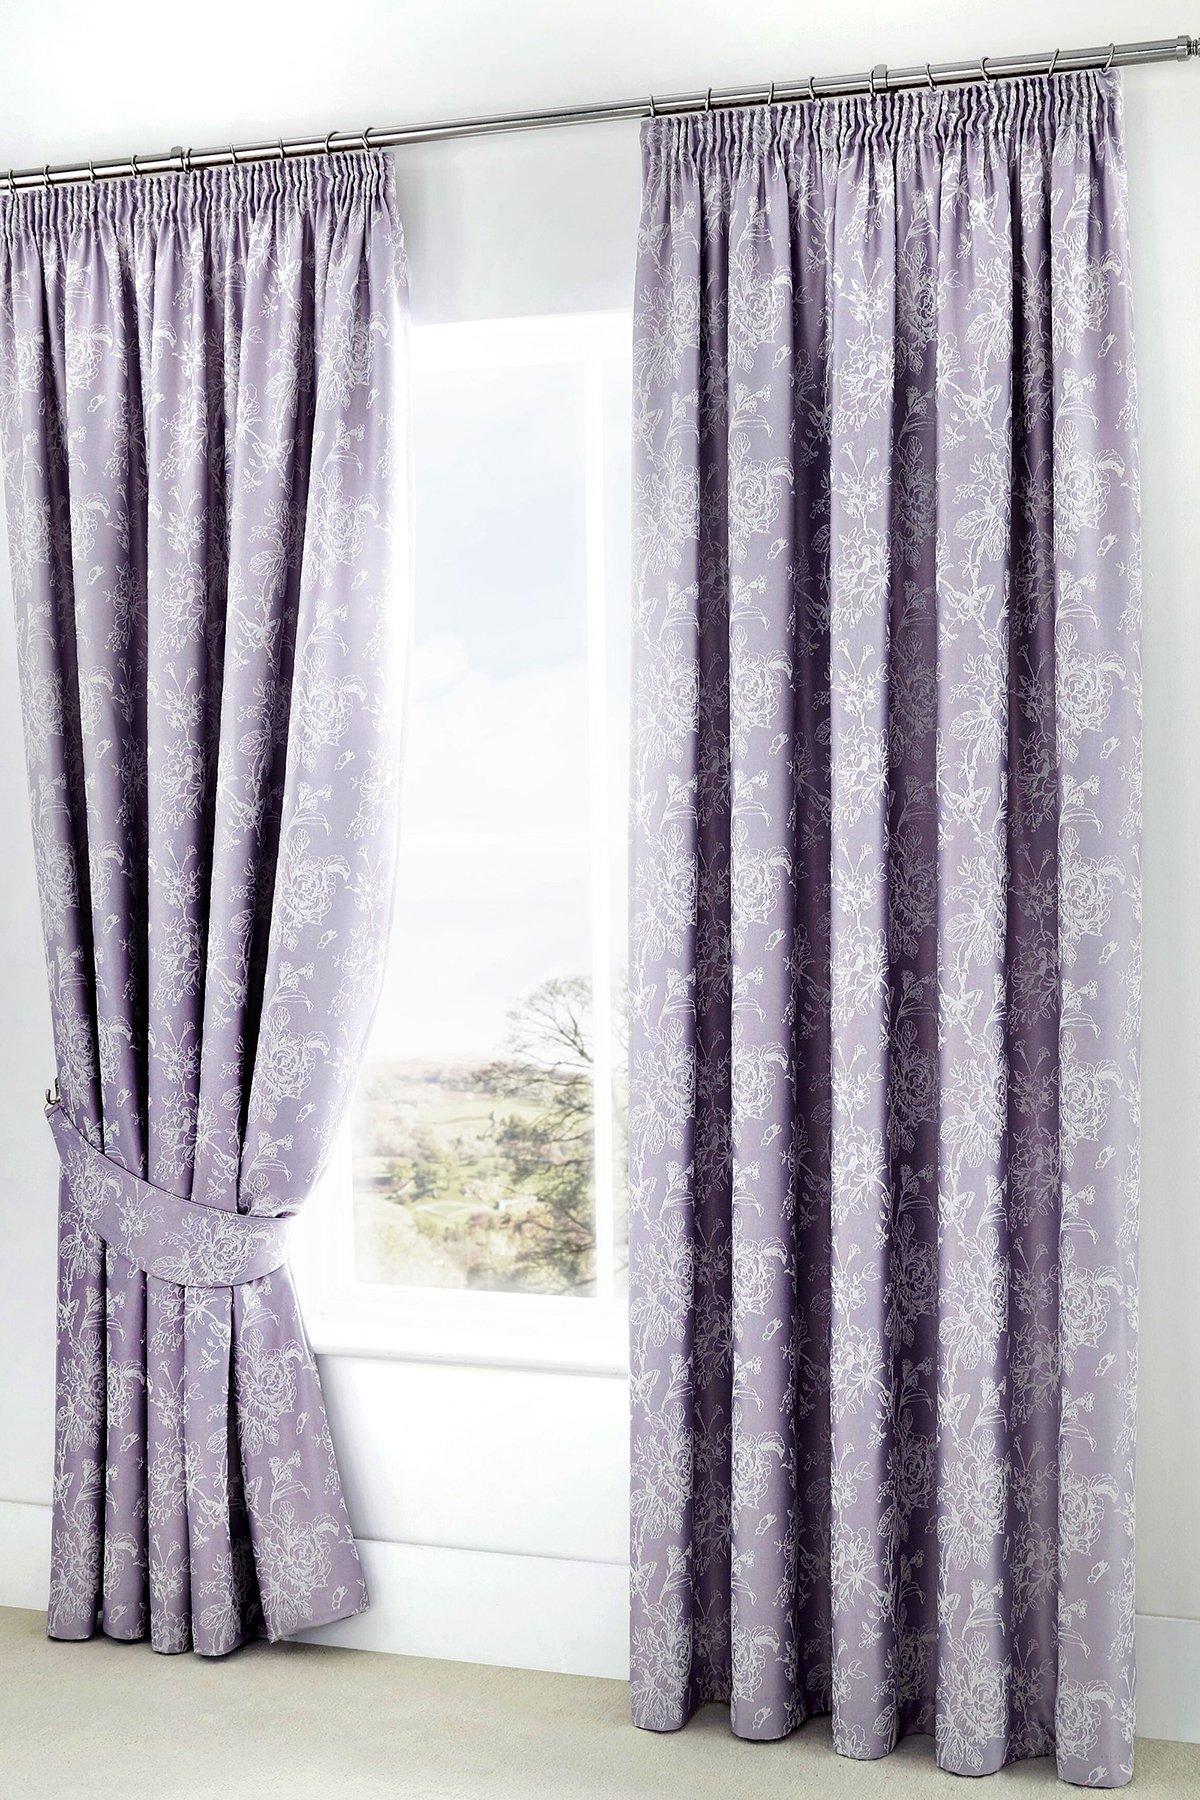 'Jasmine' Floral Jacquard Weave Pair of Lined Pencil Curtains with Tie-backs